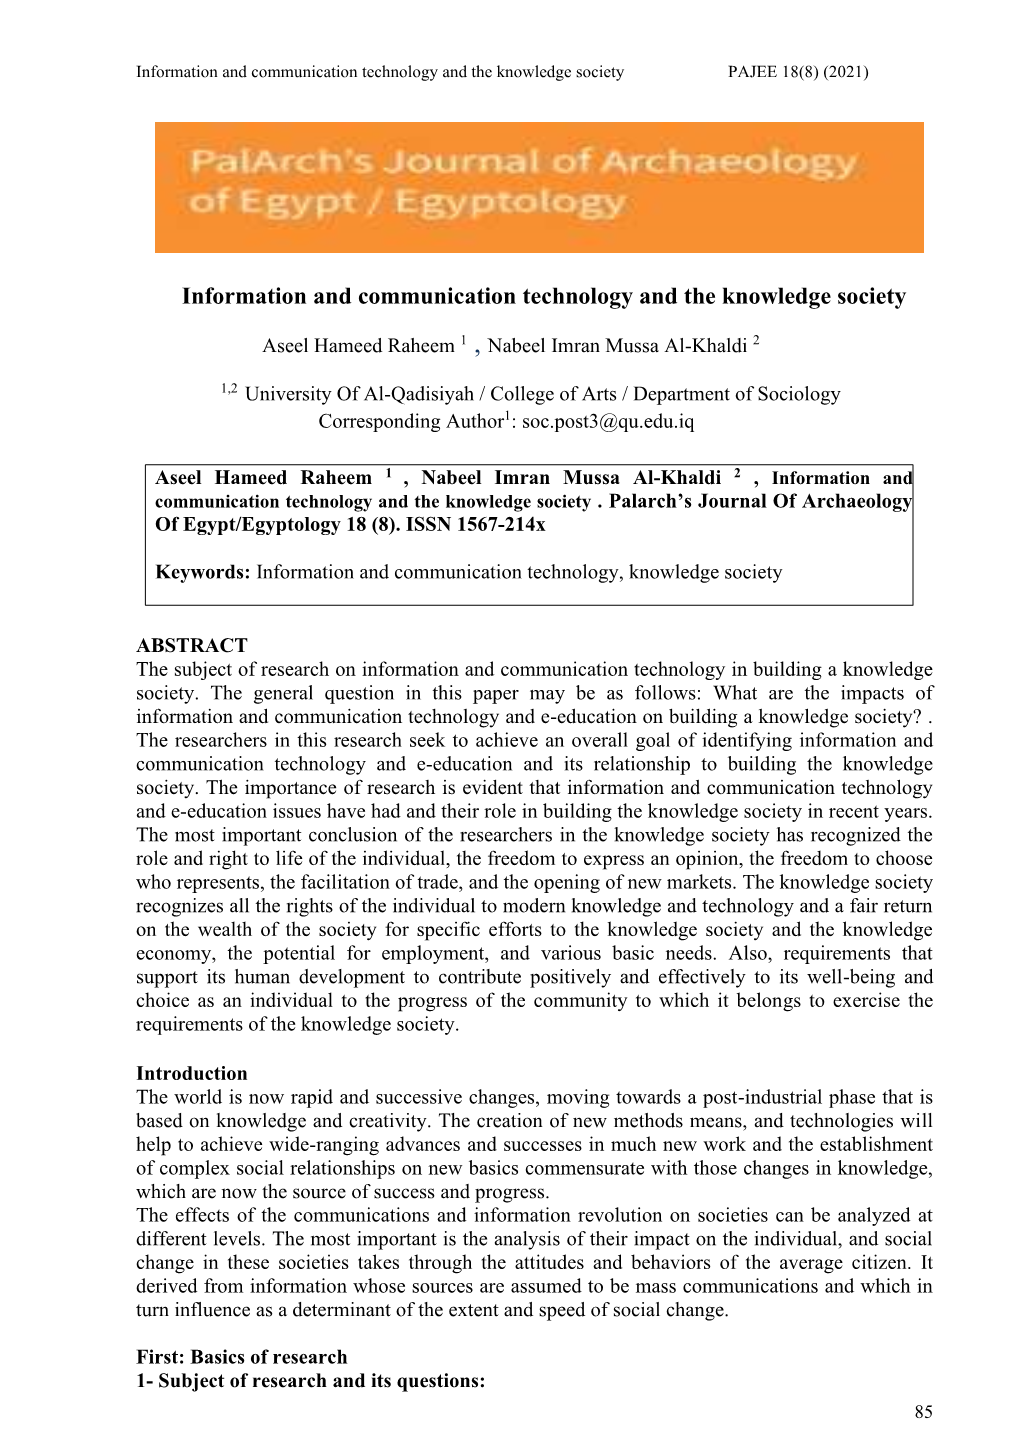 Information and Communication Technology and the Knowledge Society PAJEE 18(8) (2021)